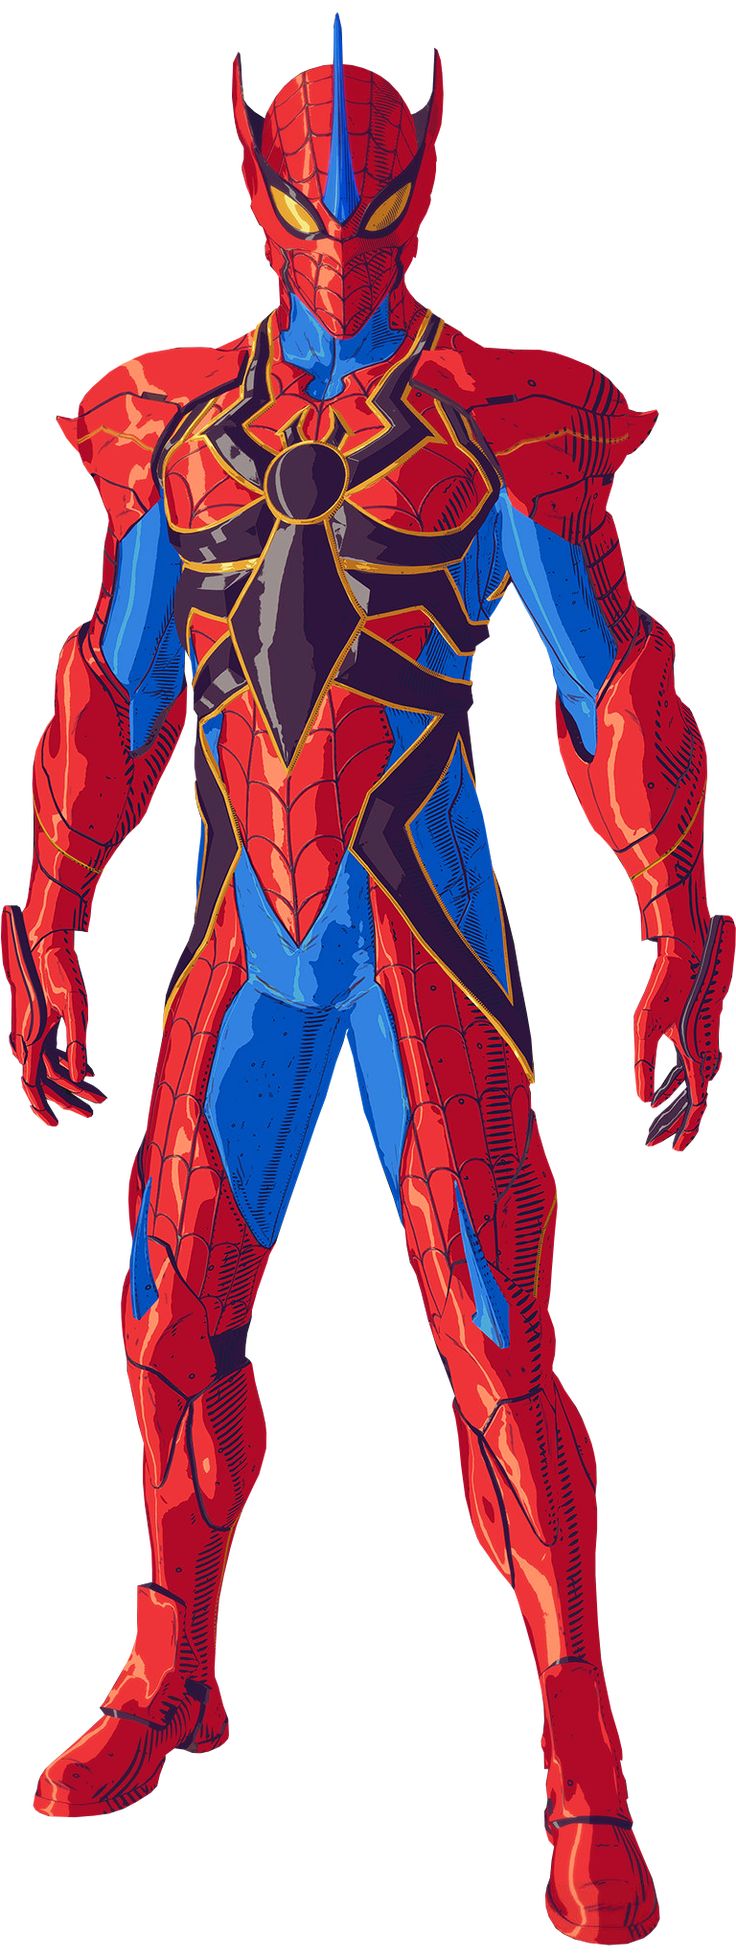 The Arachnid Rider Suit Is A Suit In Marvel's Spider Man. It Is A Free Suit Provided As Part Of The 1.19 Update. Spiderman, Marvel Spiderman, Vintage Comic Books